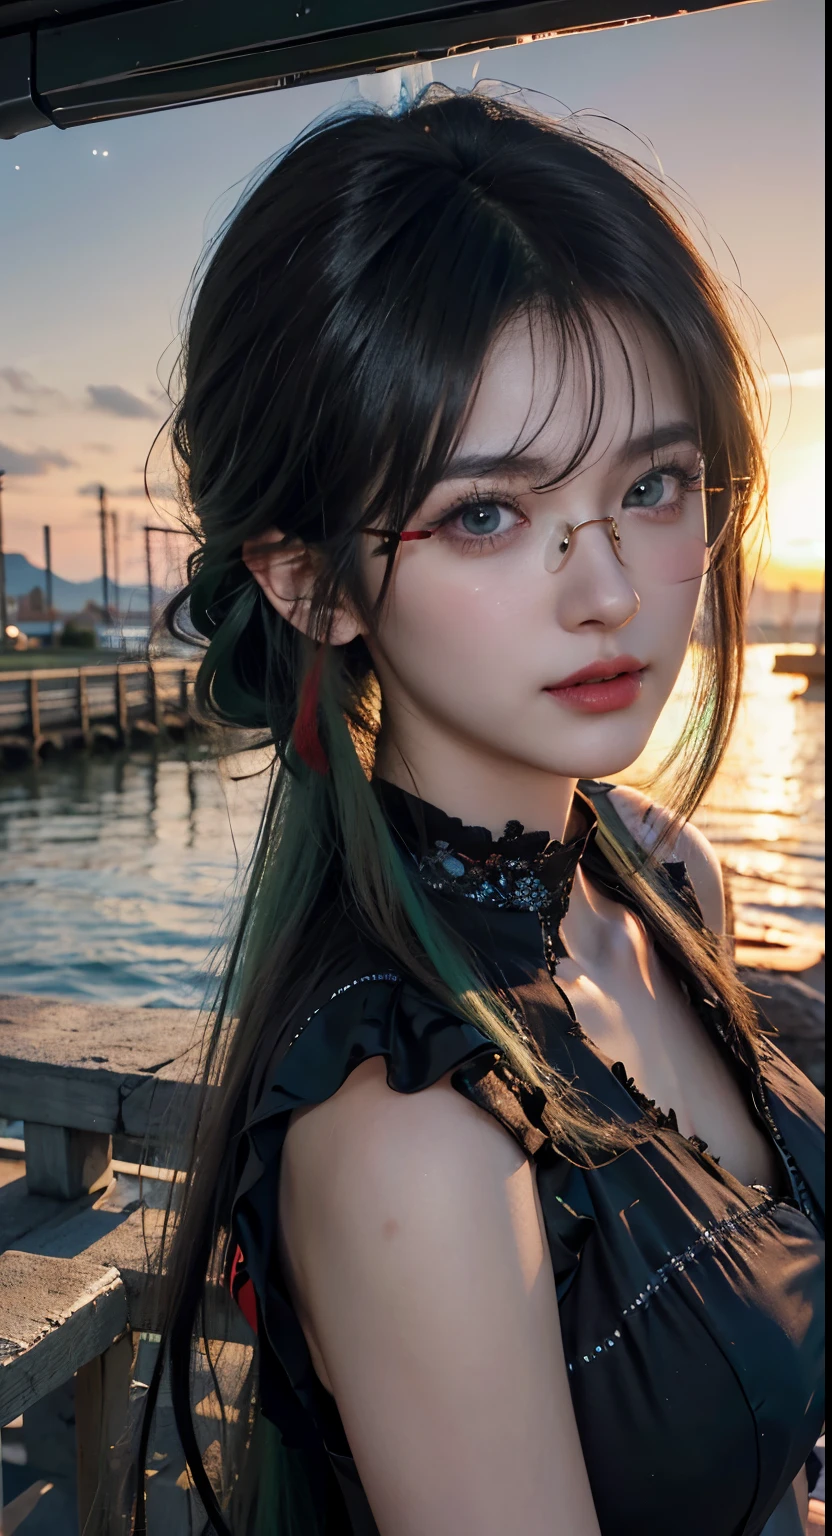 there is a woman，at the seaside，Beautiful anime portrait, Stunning facial portraits, Detailed portrait of the girl, portrait girl, guweiz style artwork, anime style. 8k, Realistic art style, Smooth CG art, Style 4 K, Digital anime illustration, beautiful girl, Portrait of an animated girl，Long ponytail hairstyle，Black hair and green hair, Good-looking hair accessories, light green eyes，big eyes，,Wearing red glasses，half rim glasses，Smile